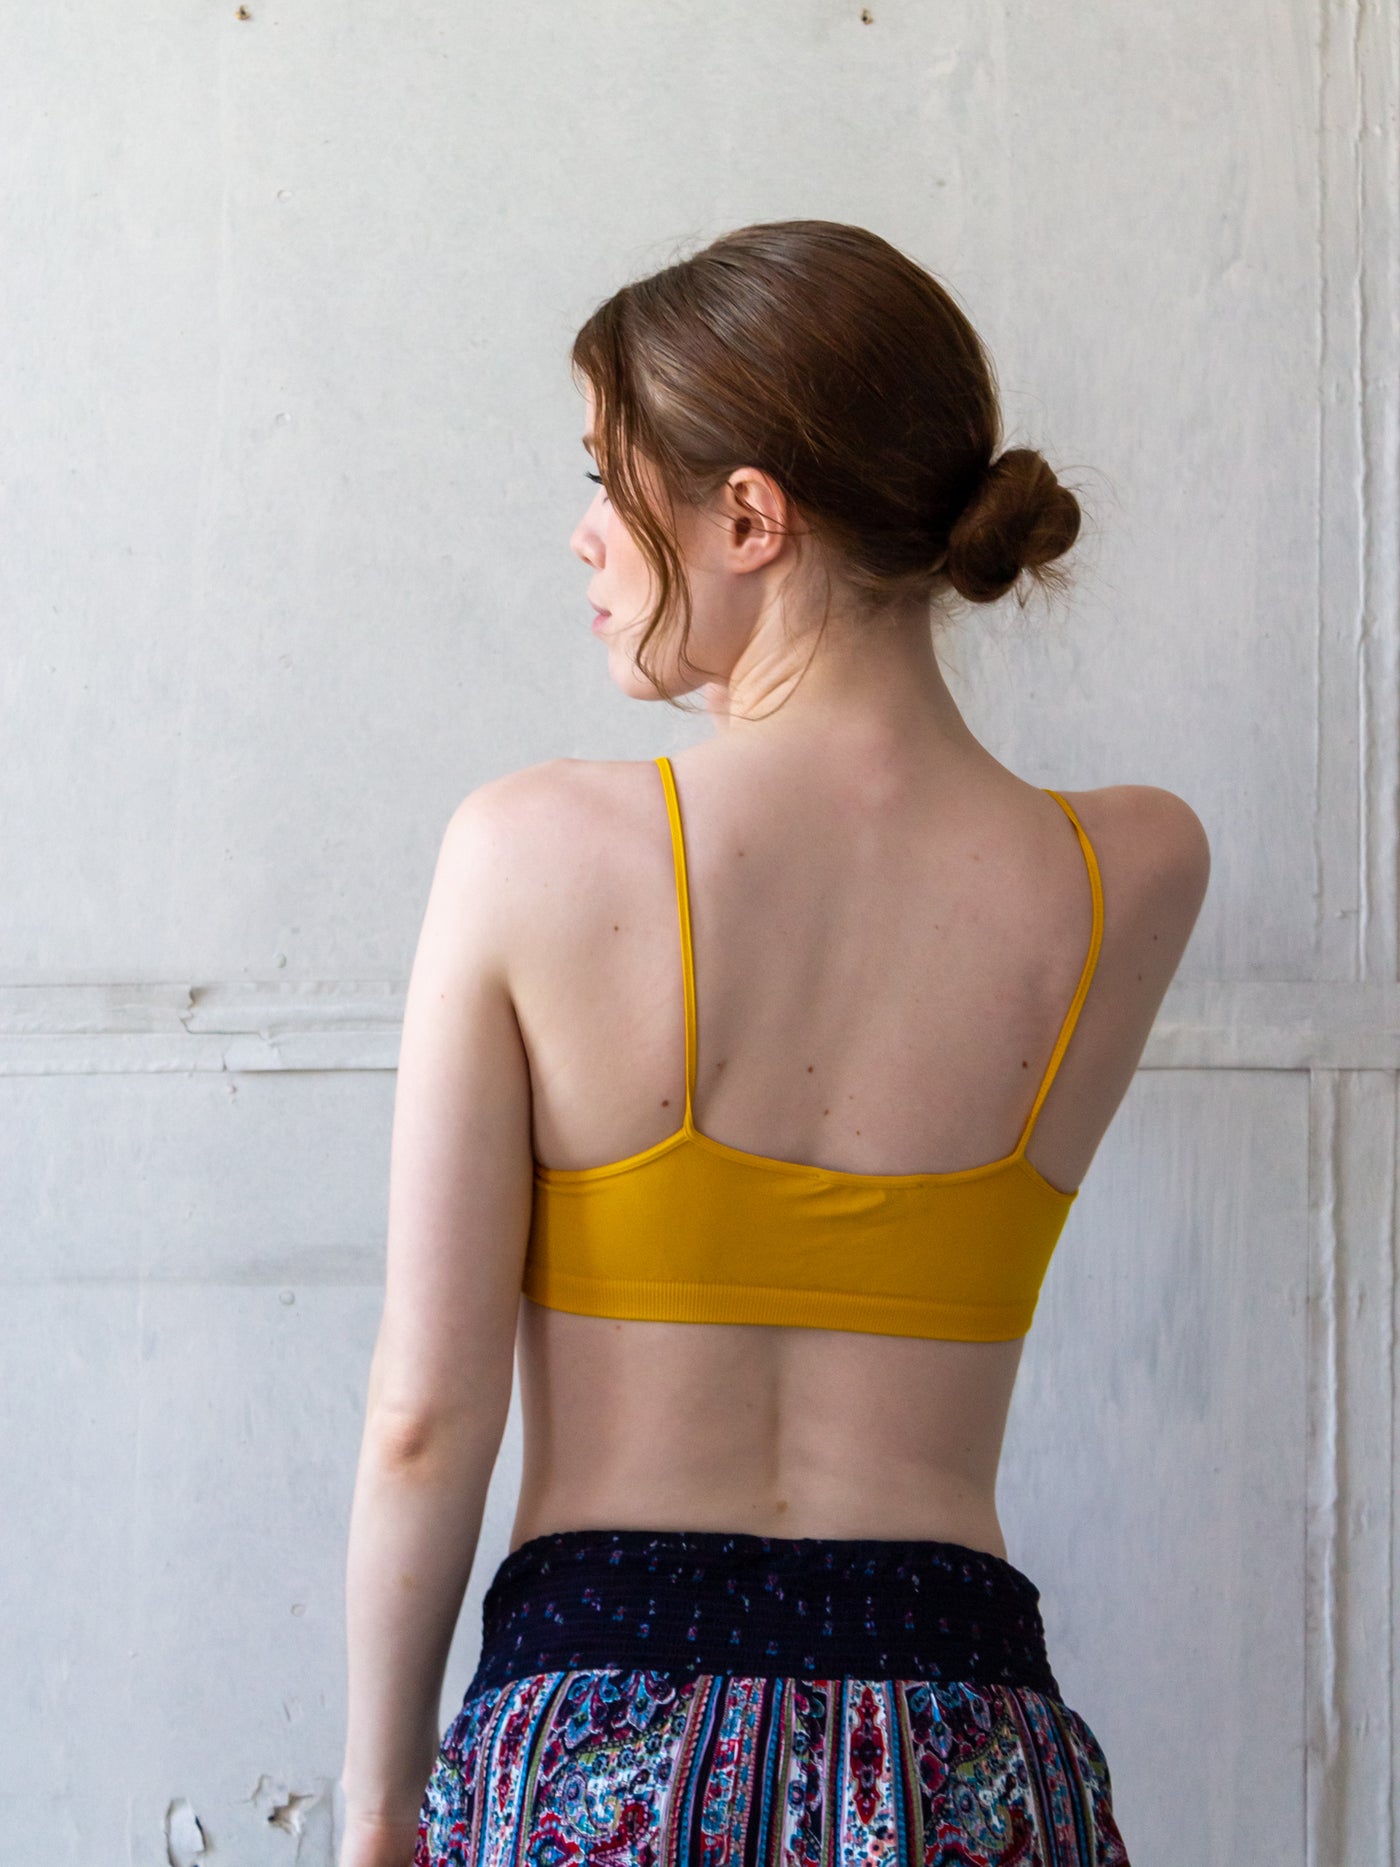 A model wearing a yellow bralette that is simple, stretchy material. It has two straps and a cage like design with two straps. Each strap is attached at the side seam and crosses over in front to attach to the other side about one inch from the small v neck. The main straps attach at the middle of each bra side and pull it up to form a peak.